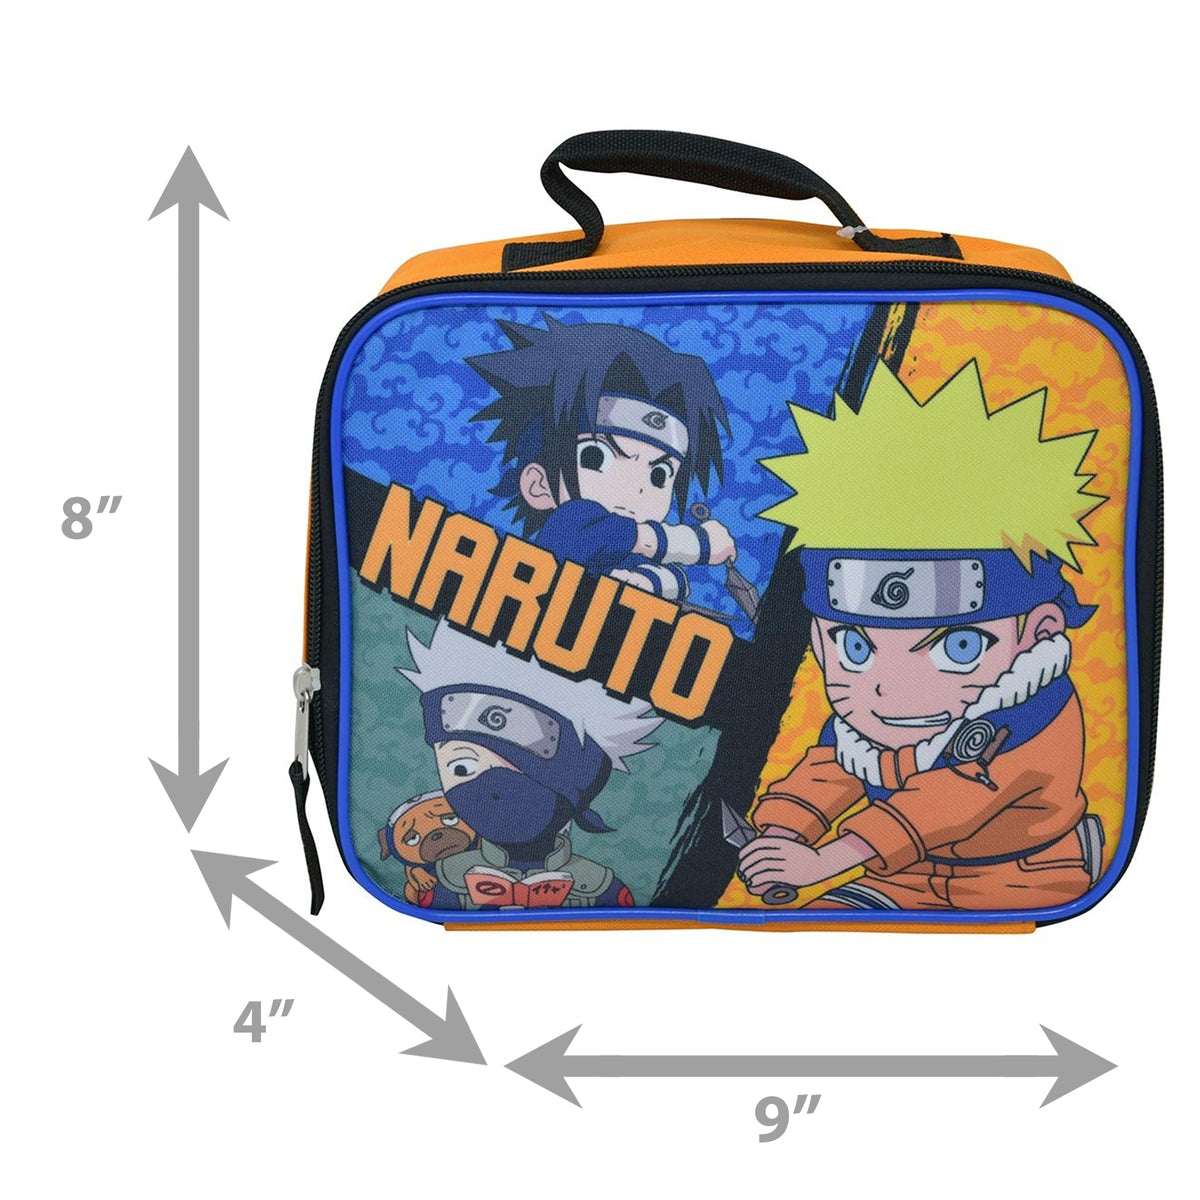 Naruto Insulated Lunch Tote - FINAL SALE